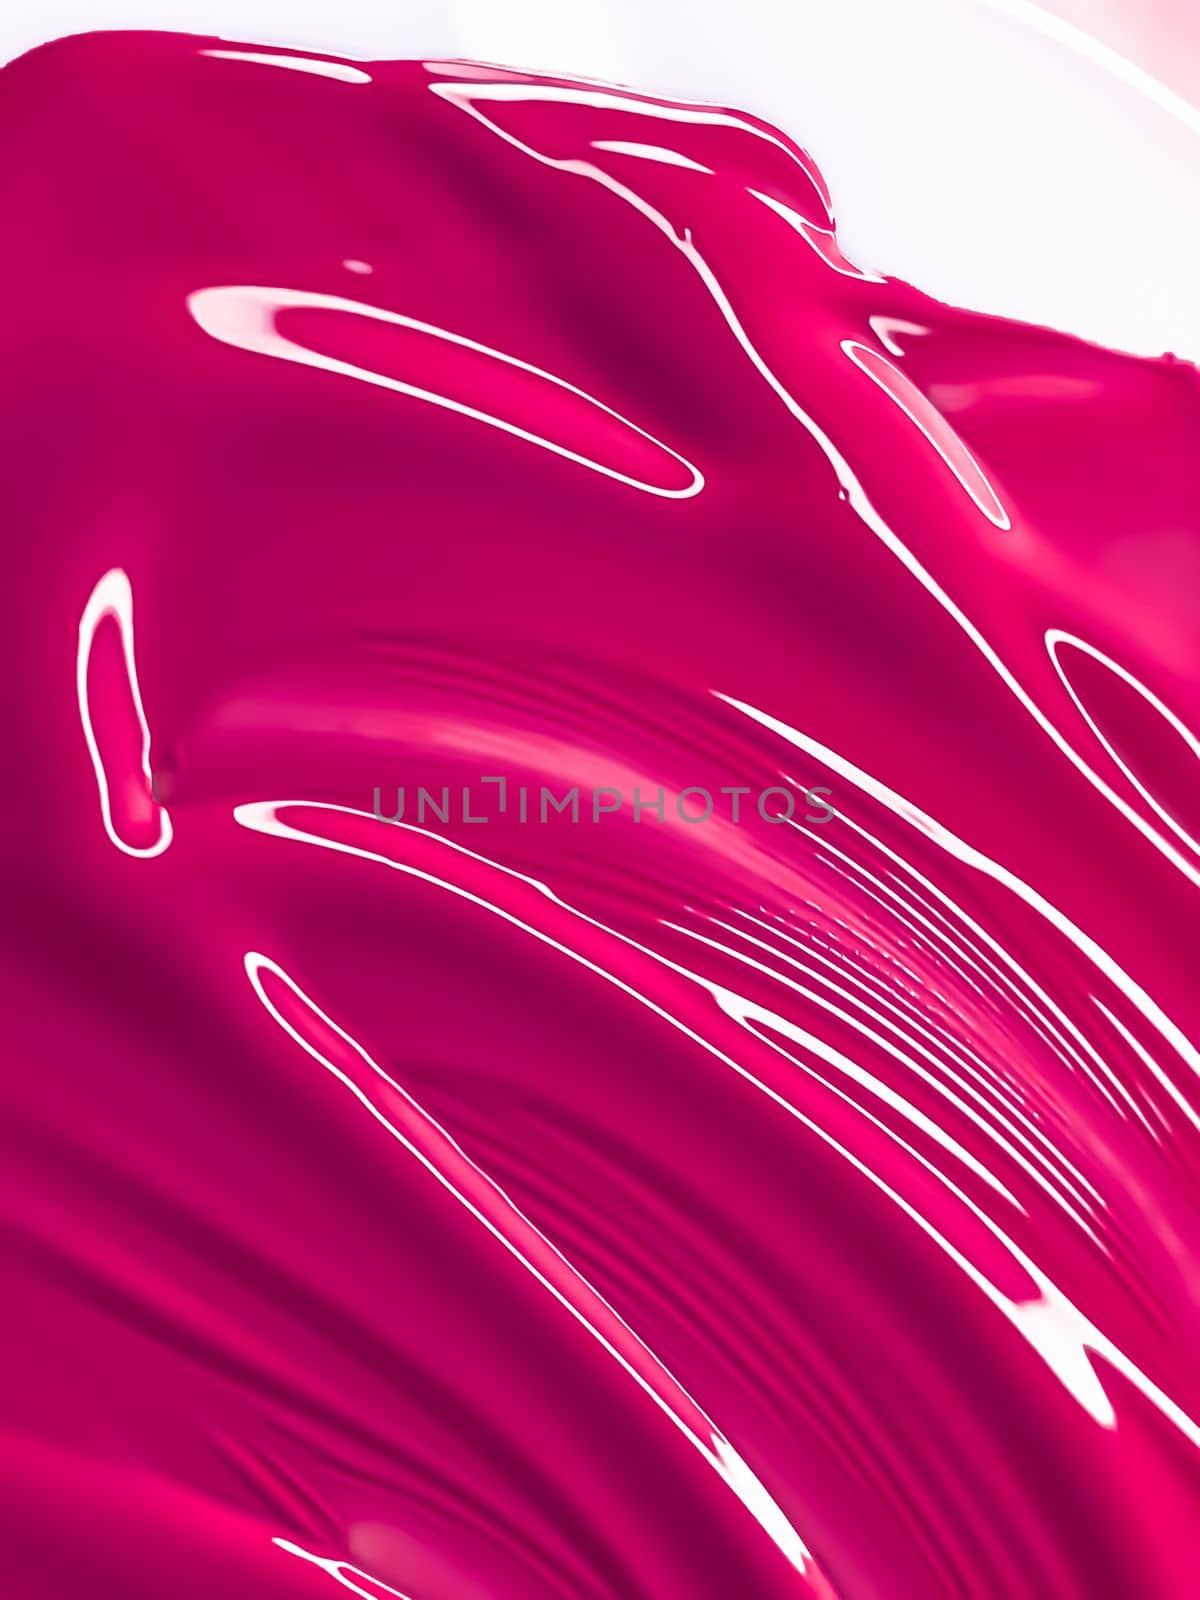 Glossy pink cosmetic texture as beauty make-up product background, cosmetics and luxury makeup brand design by Anneleven